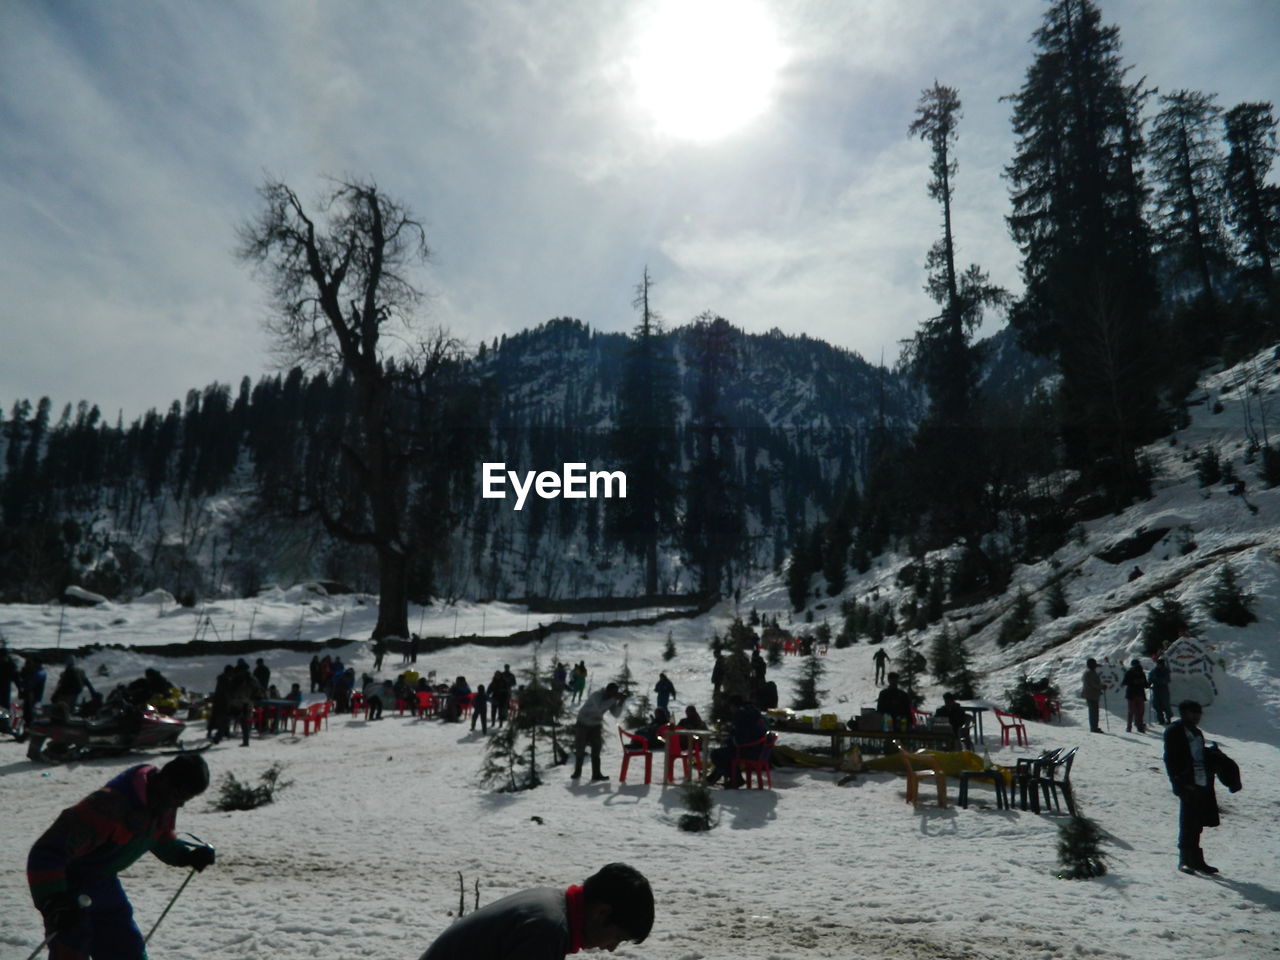 PEOPLE ON SNOW COVERED MOUNTAIN